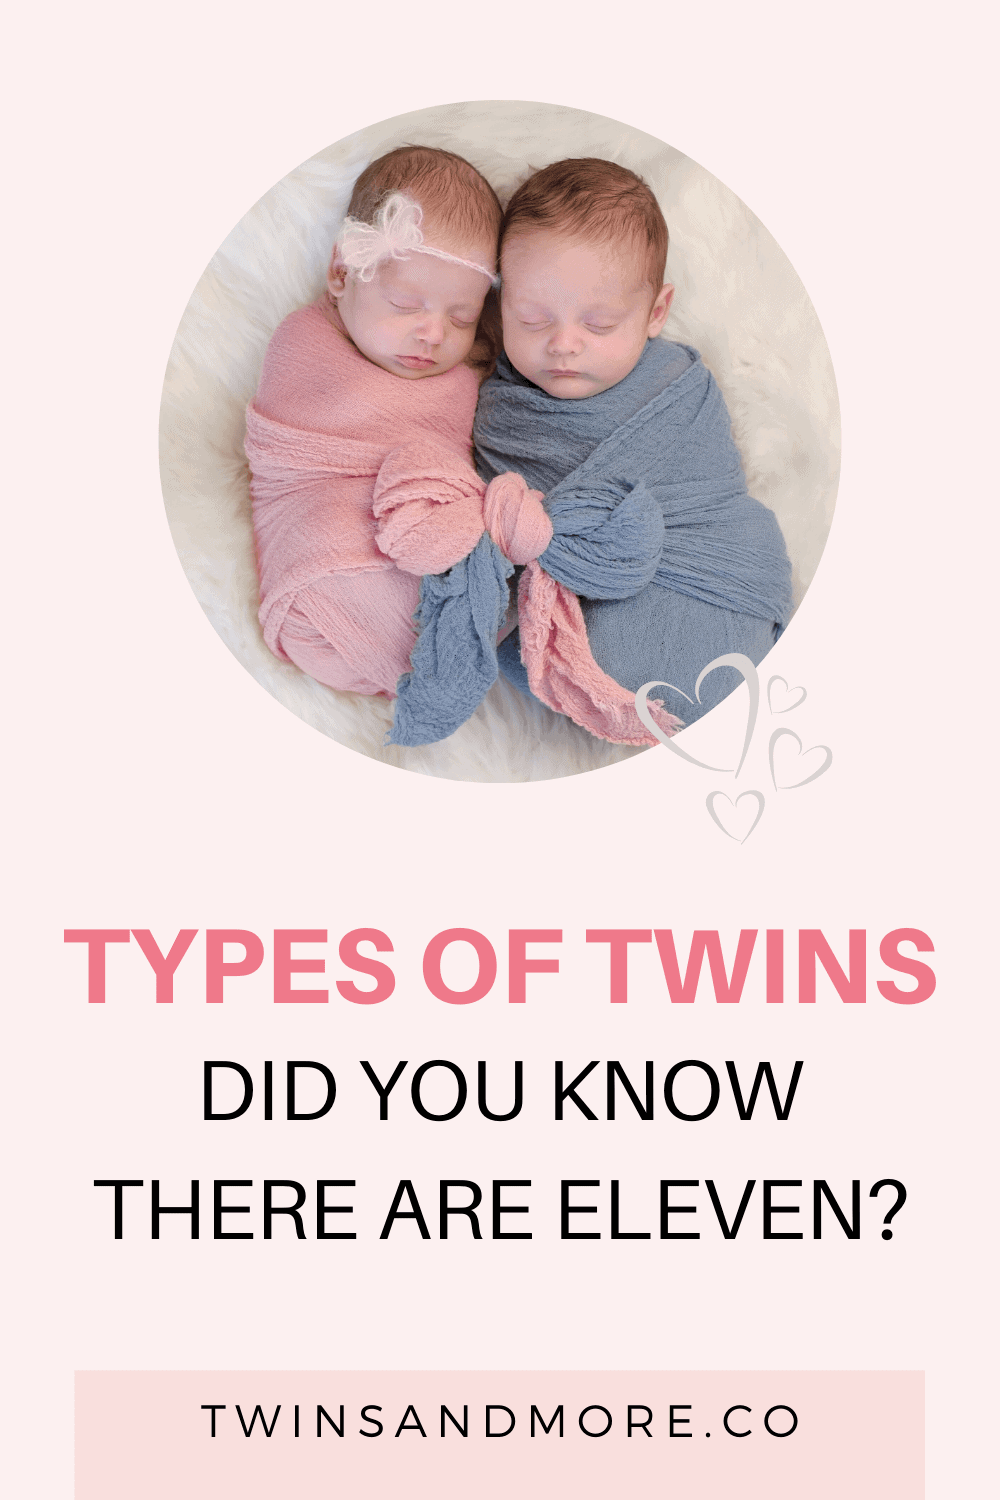 Types of Twins - Did you know there are ELEVEN?